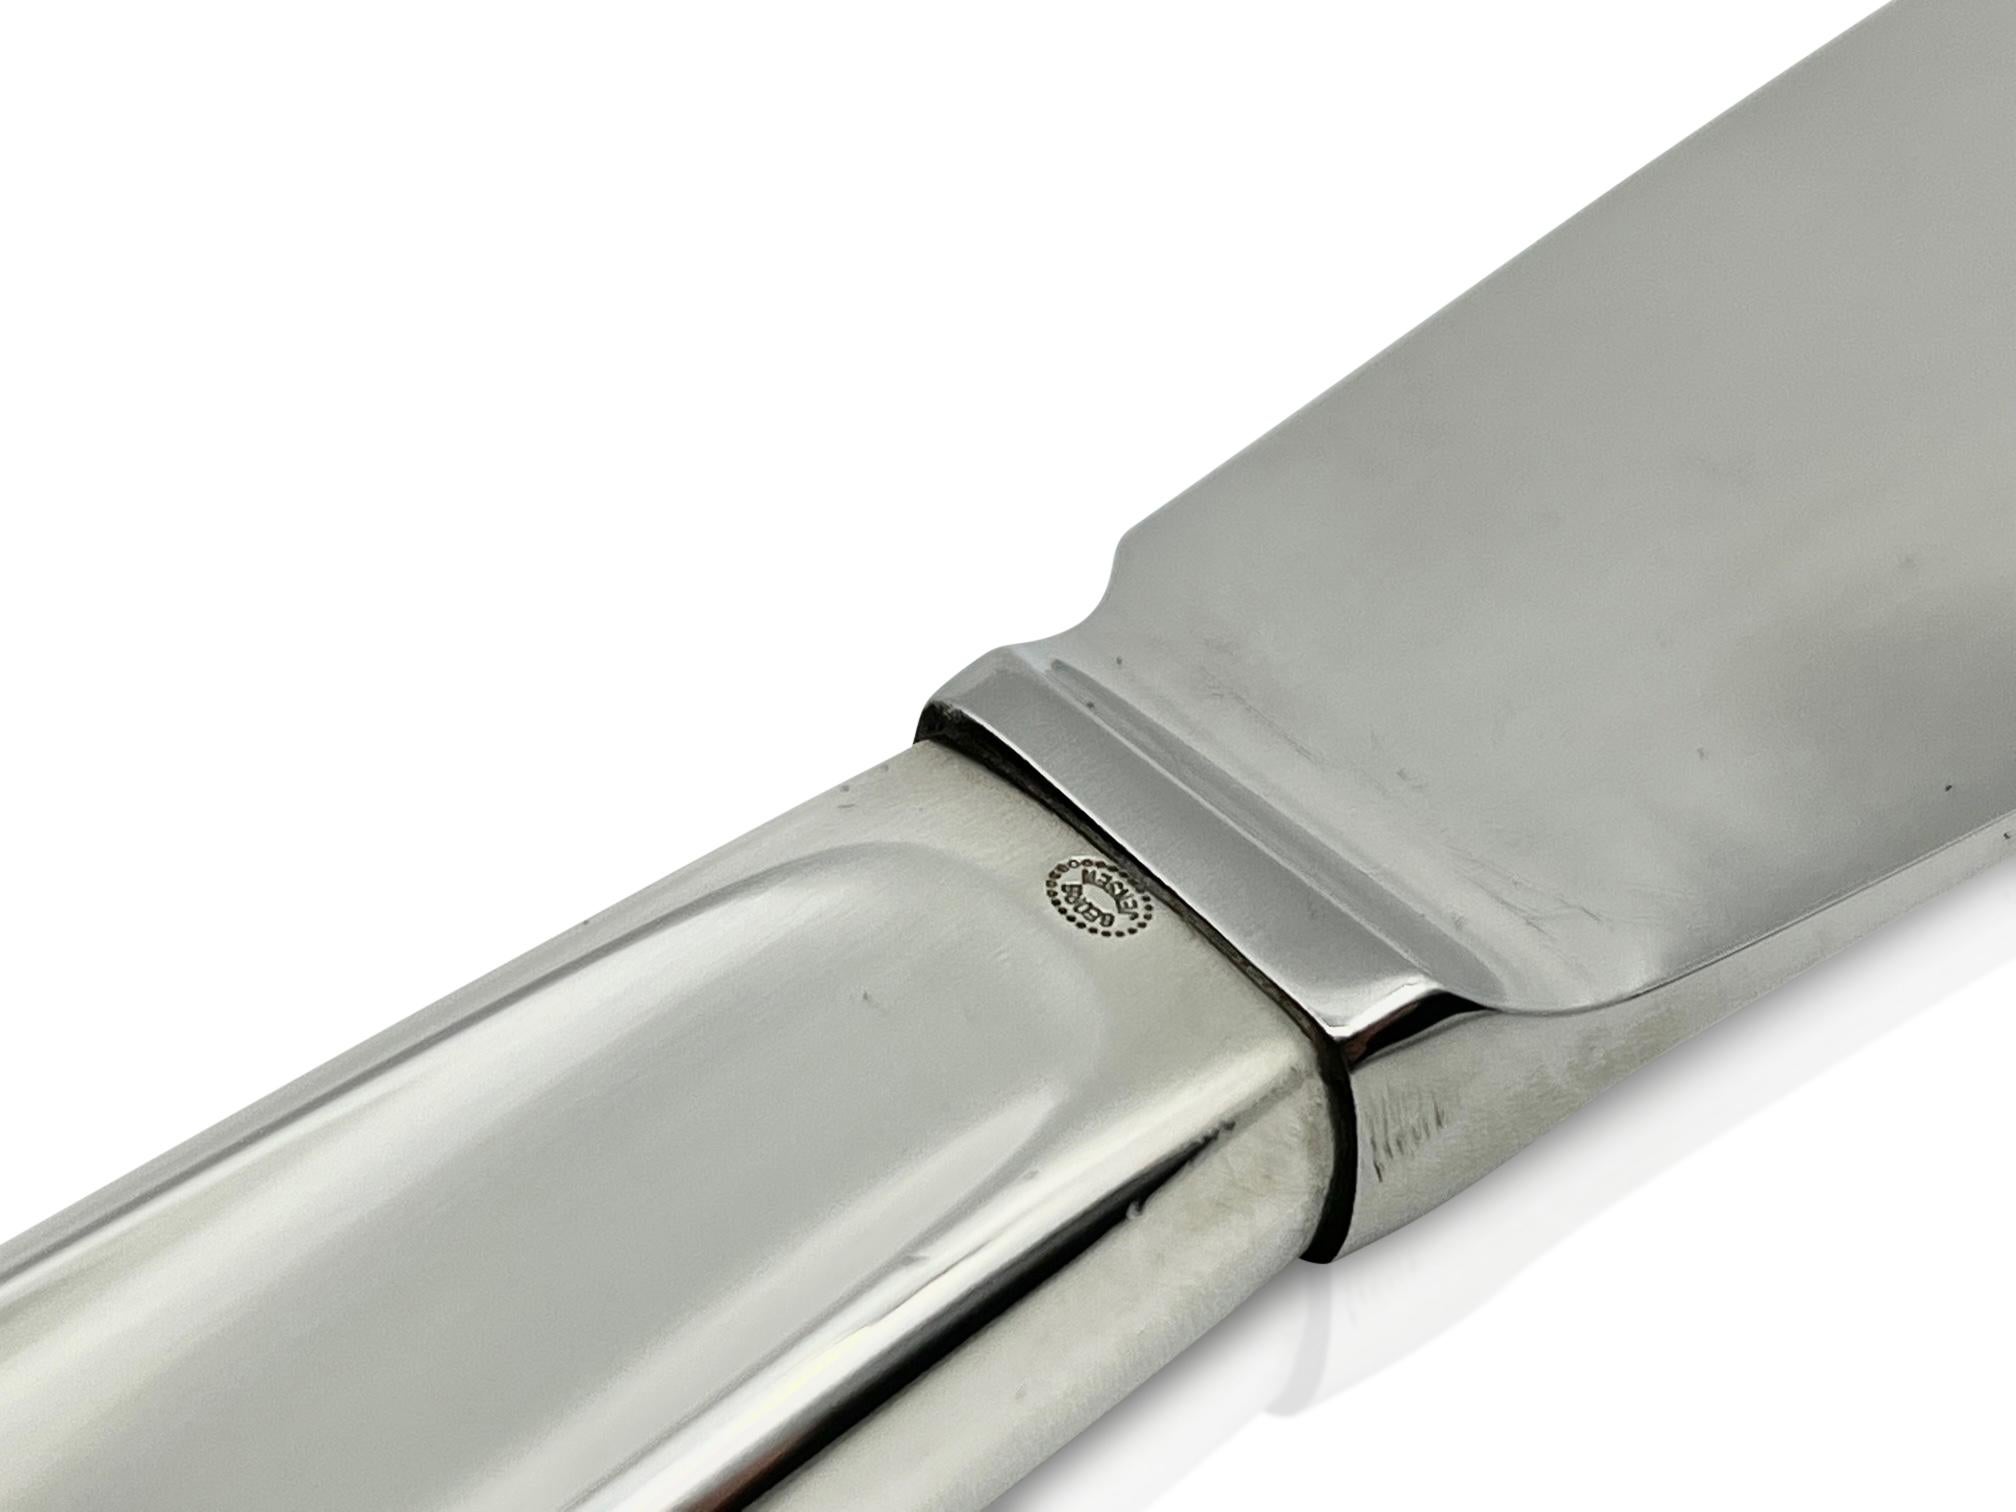 Georg Jensen cake knife with sterling silver handle and stainless steel blade, item 196 in the Cypress pattern, design #99 by Tias Eckhoff. Norwegian designer Tias Eckhoff’s Cypress was the winning design in a competition to design a flatware